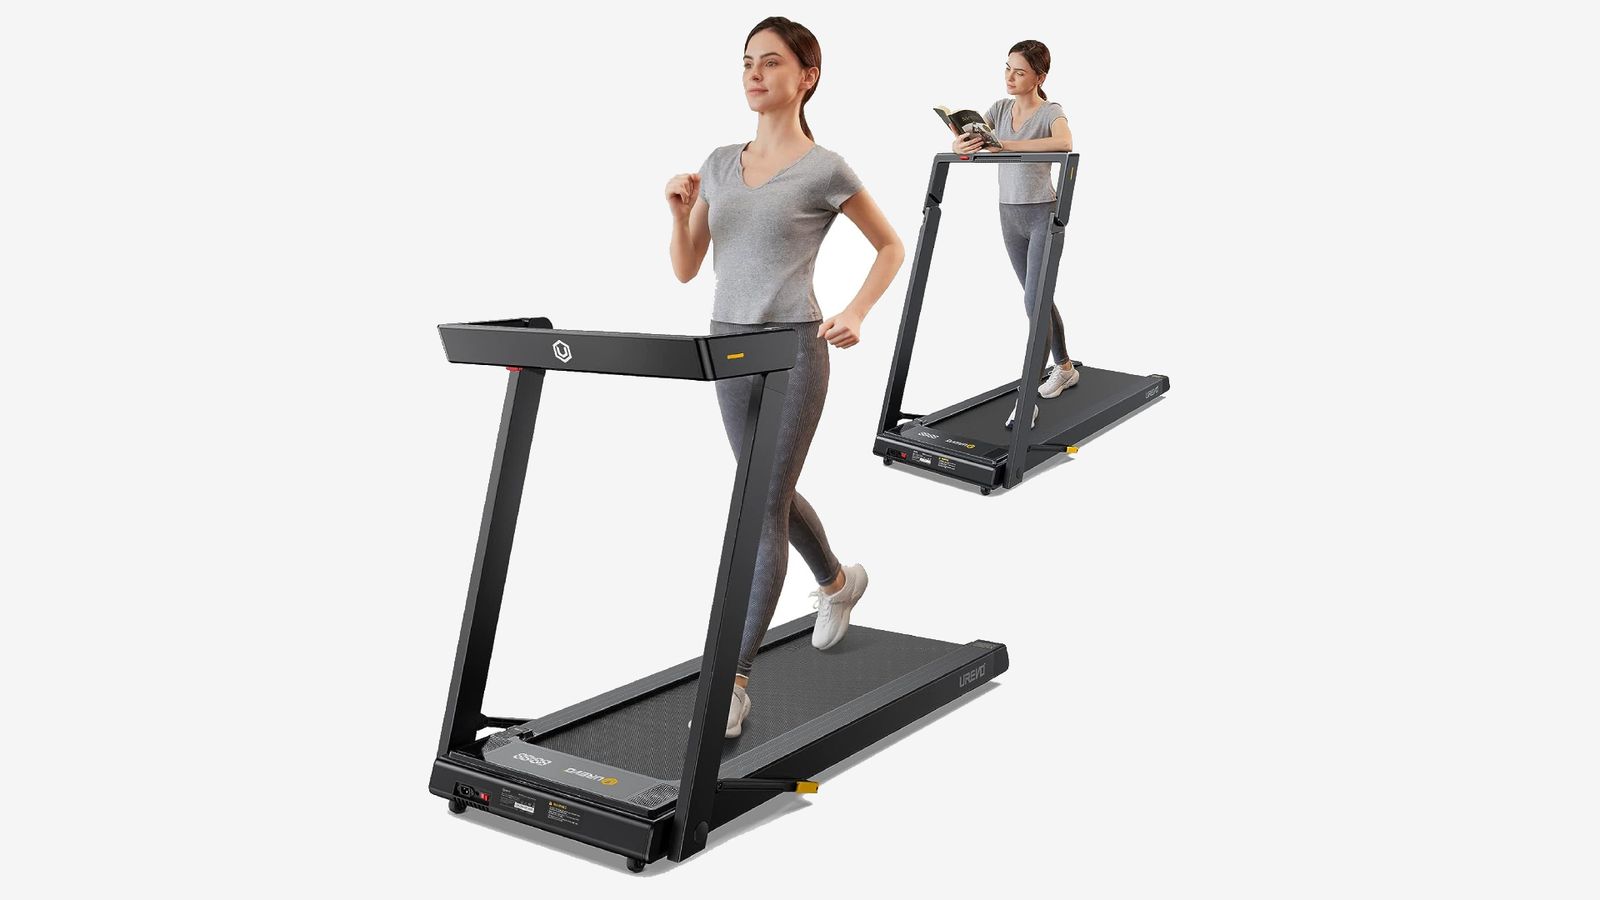 UREVO URTM012 product image of someone in grey workout gear using a black treadmill.